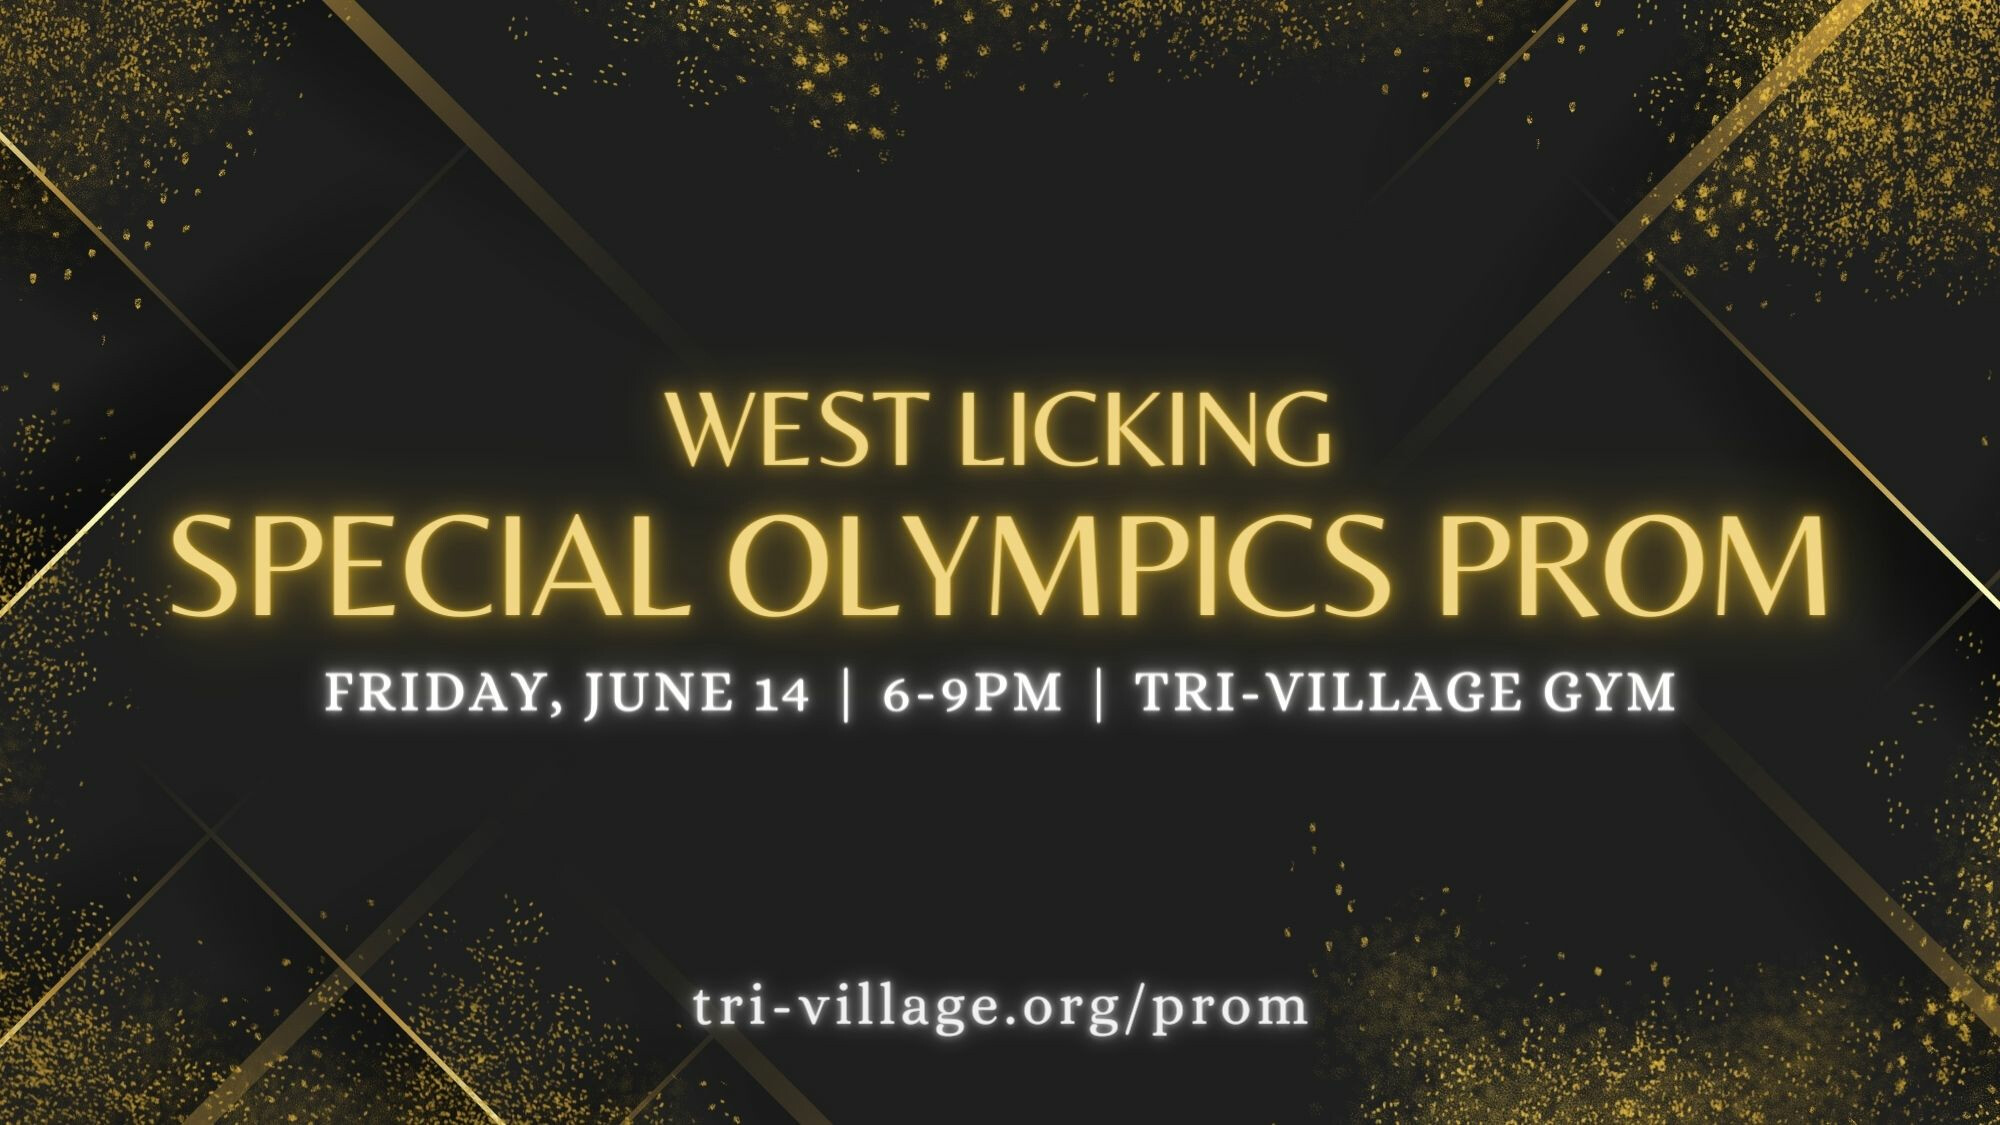 West Licking Special Olympics Prom